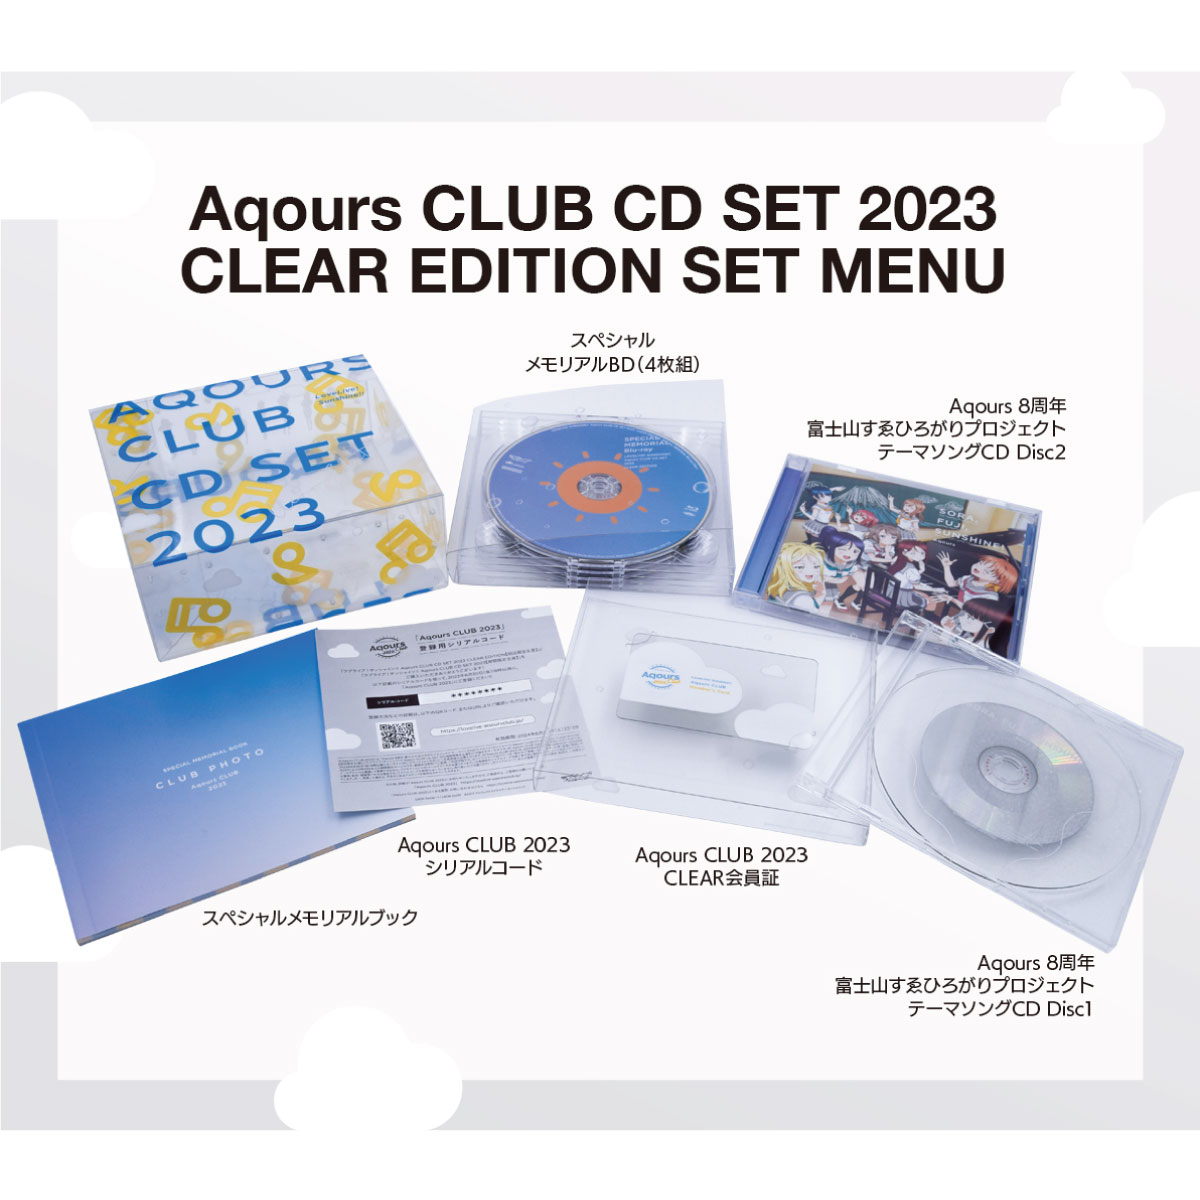 [Love Live! Sunshine!! CD] Love Live! Sunshine!! Aqours CLUB CD SET 2023  CLEAR EDITION [First Press Limited Edition] [October 2023 Delivery] (Japan 